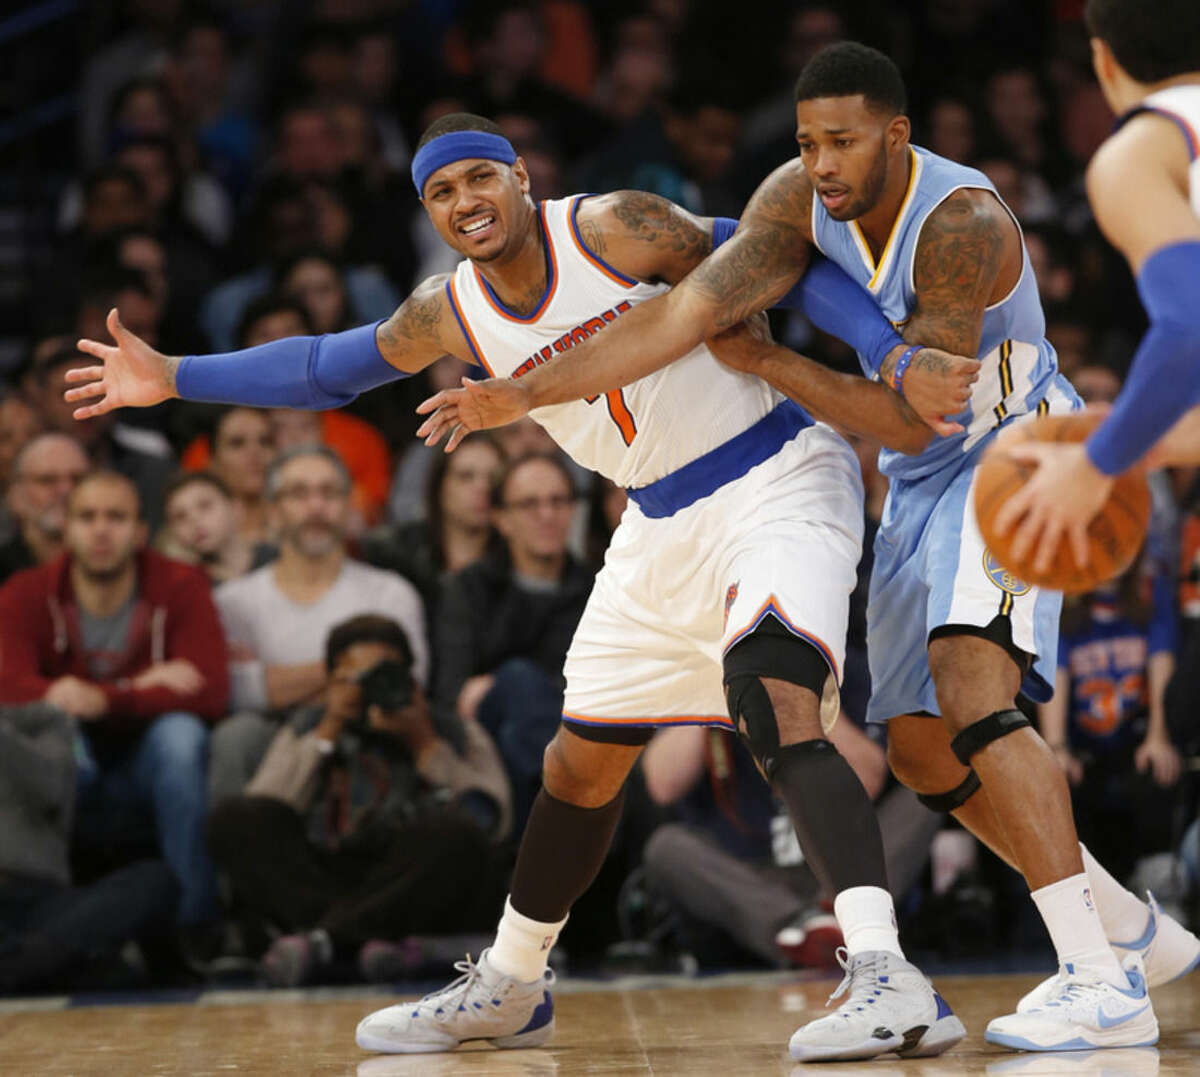 New York Knicks forward Carmelo Anthony (7) calls for the ball from Knicks guard Pablo Prigioni, right, as Denver Nuggets forward Alonzo Gee, center, defends in the first half of an NBA basketball game in New York, Sunday, Nov. 16, 2014. (AP Photo/Kathy Willens)